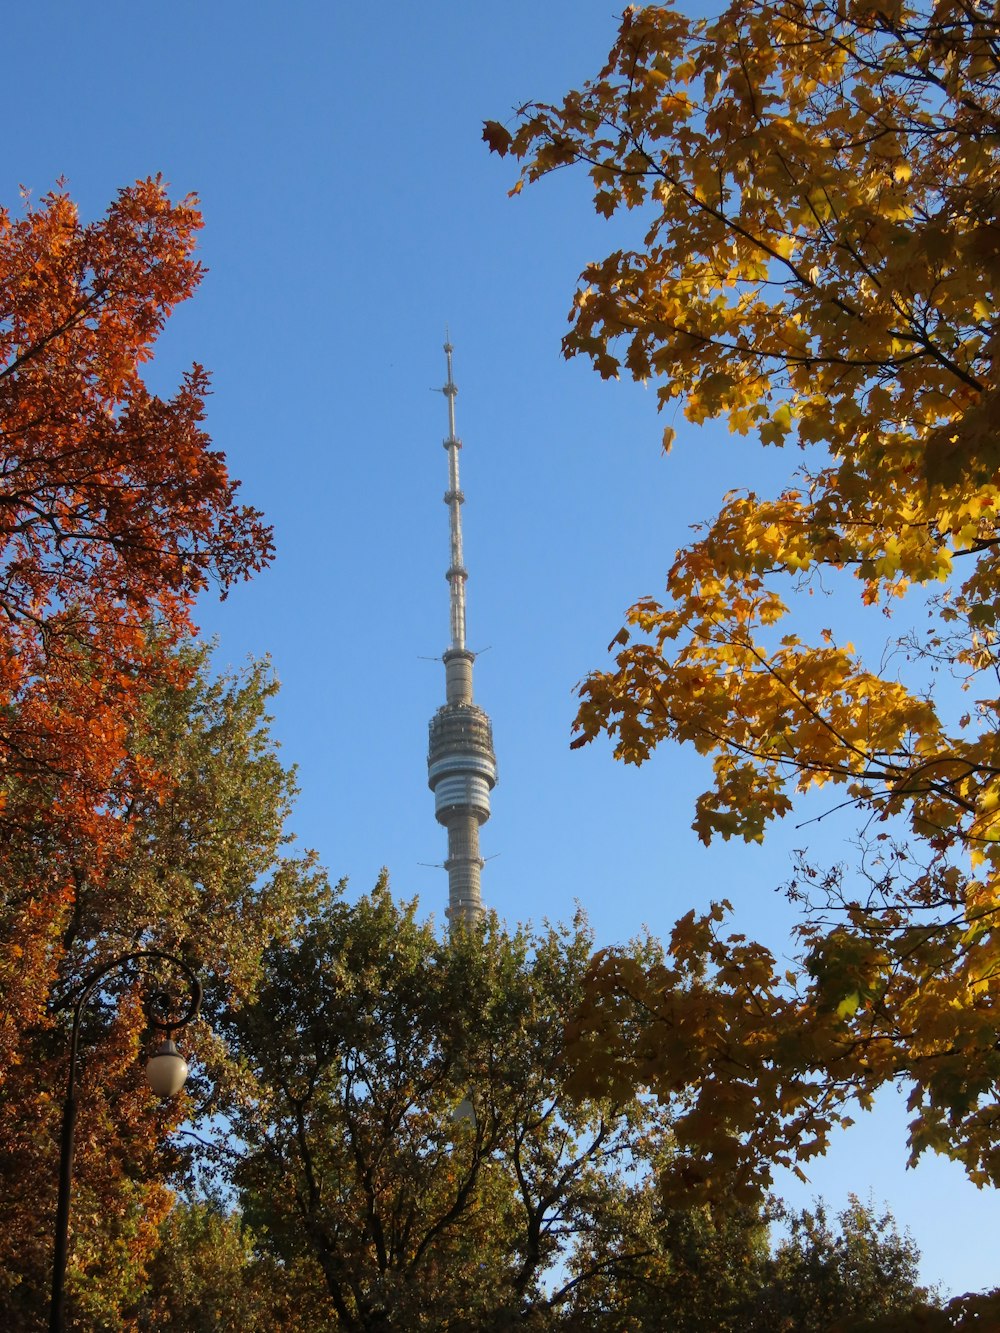 a tall tower towering over a forest filled with trees